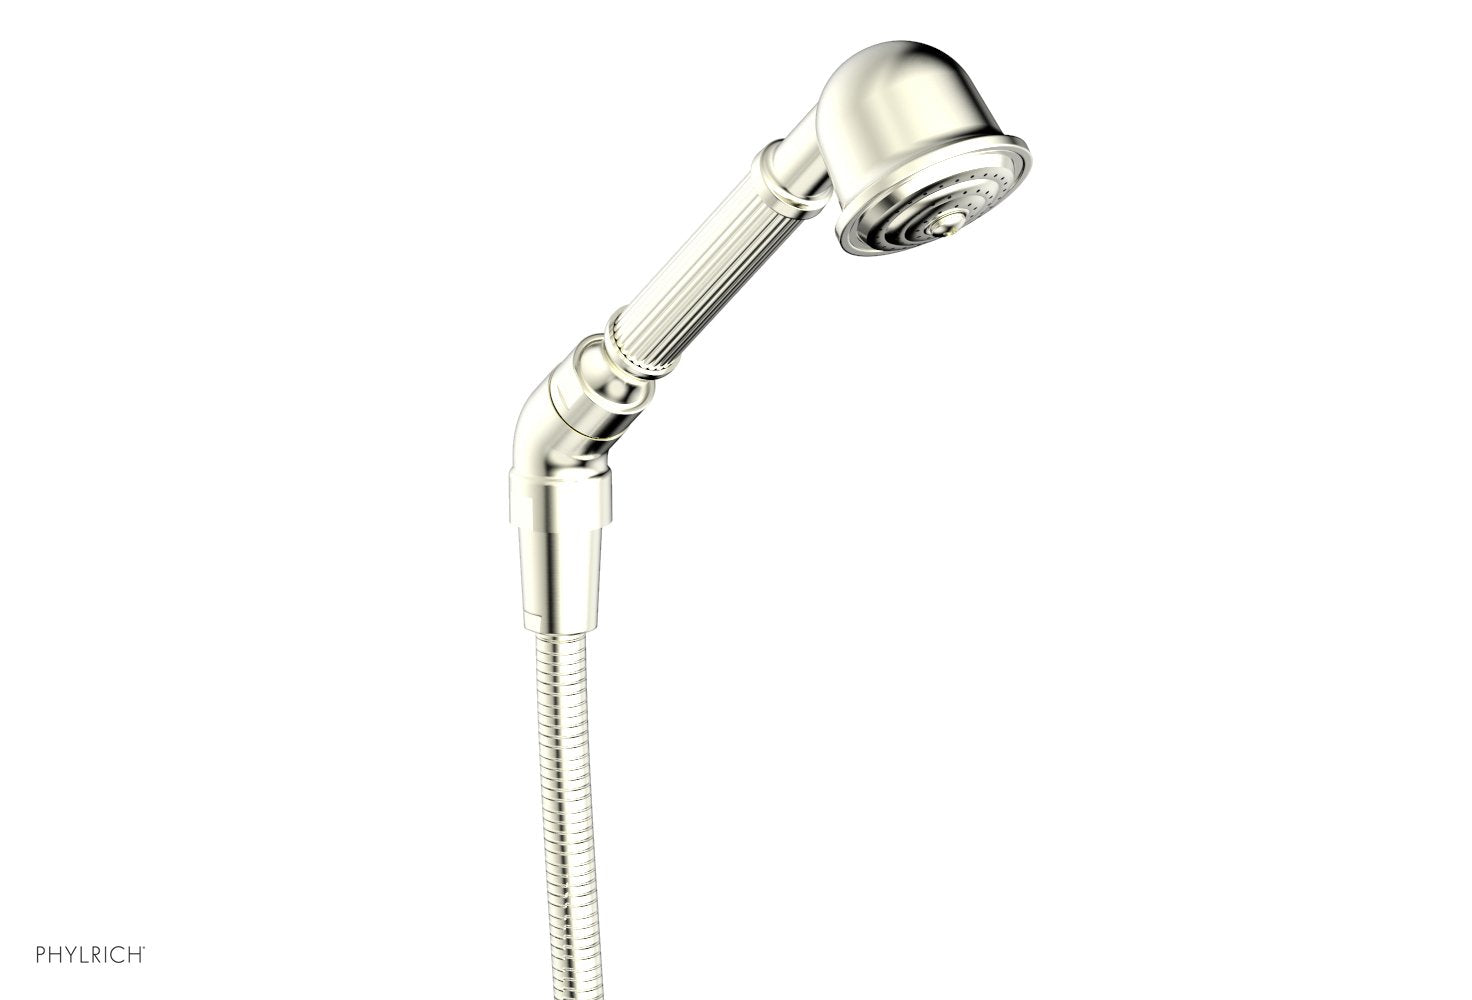 Phylrich GEORGIAN & BARCELONA Hand Shower with Hose